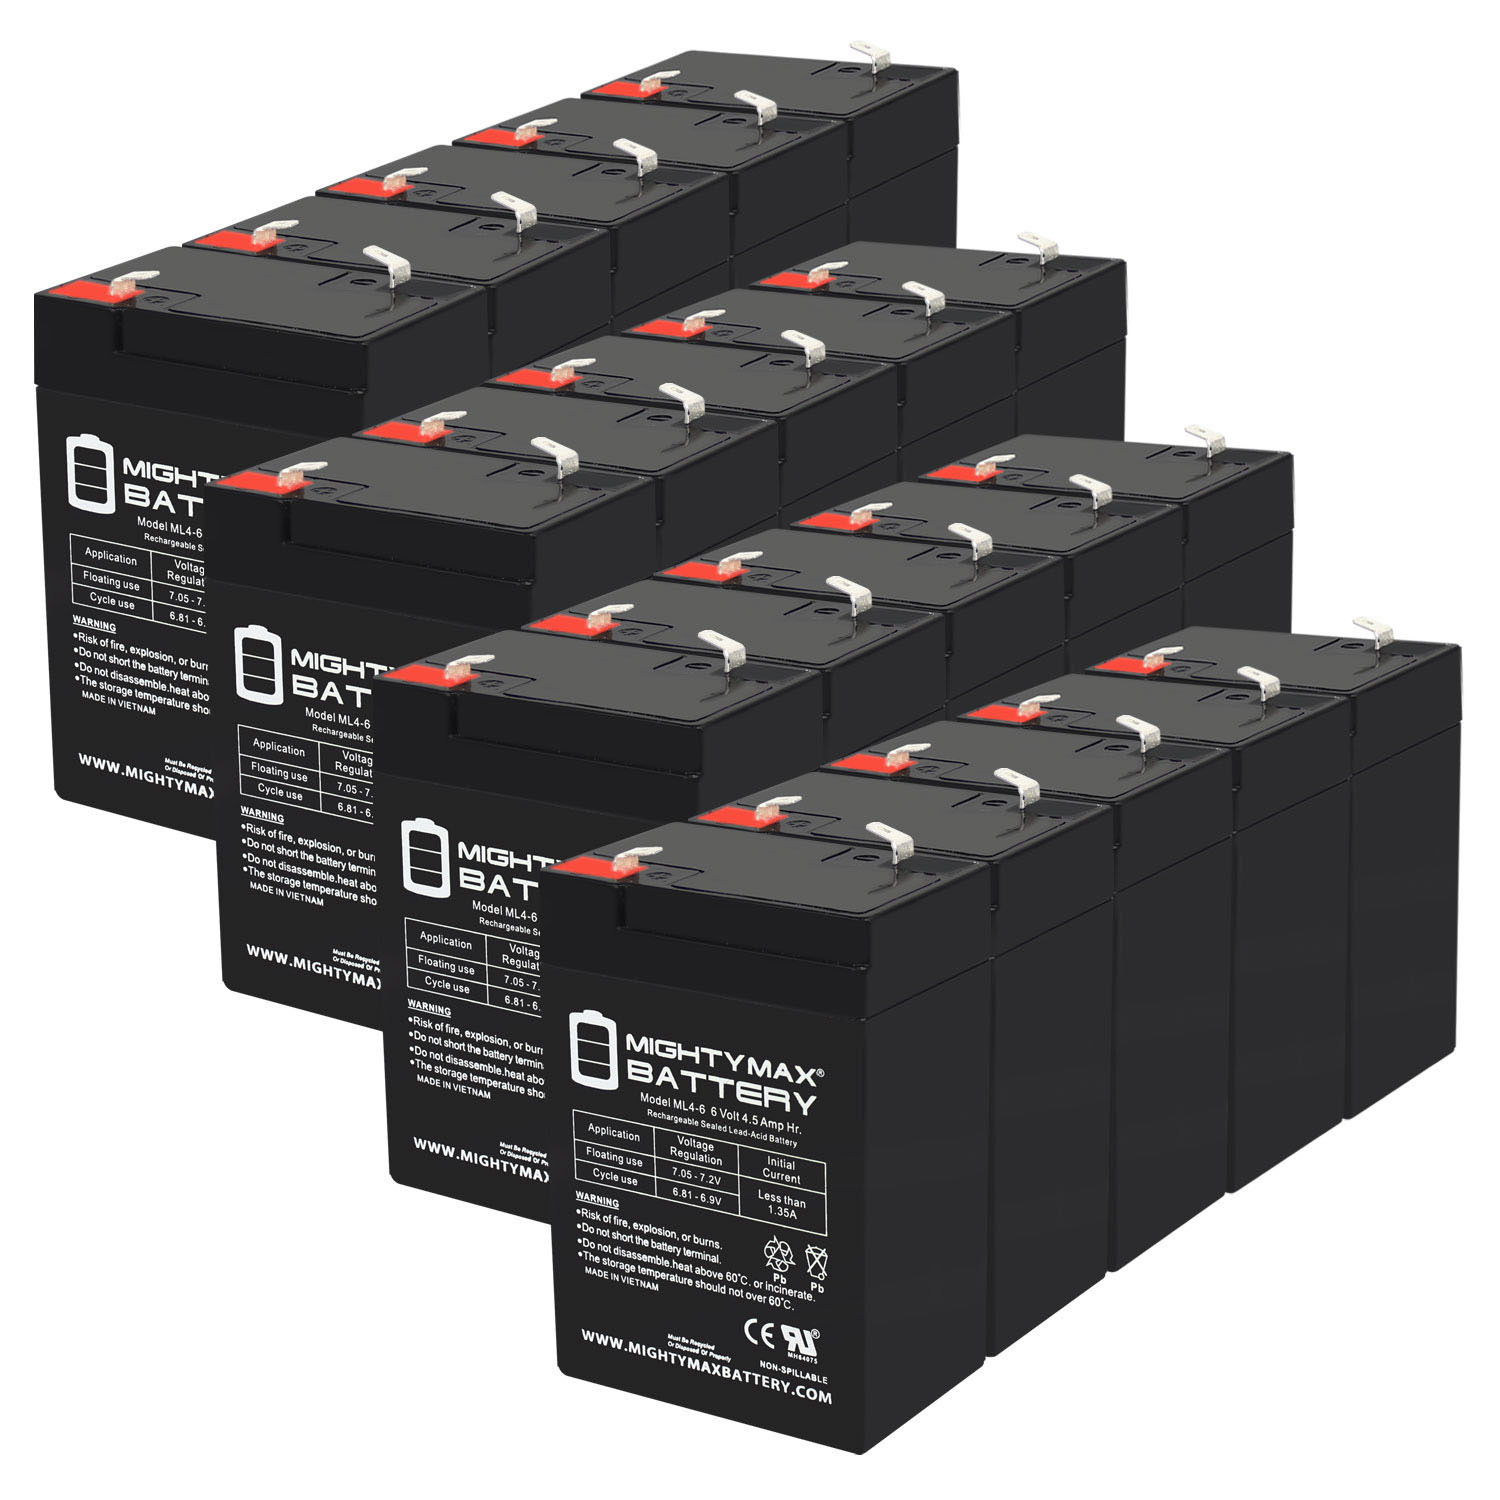 6V 4.5AH SLA Replacement Battery for Dual-Lite EZ-1A - 20 Pack